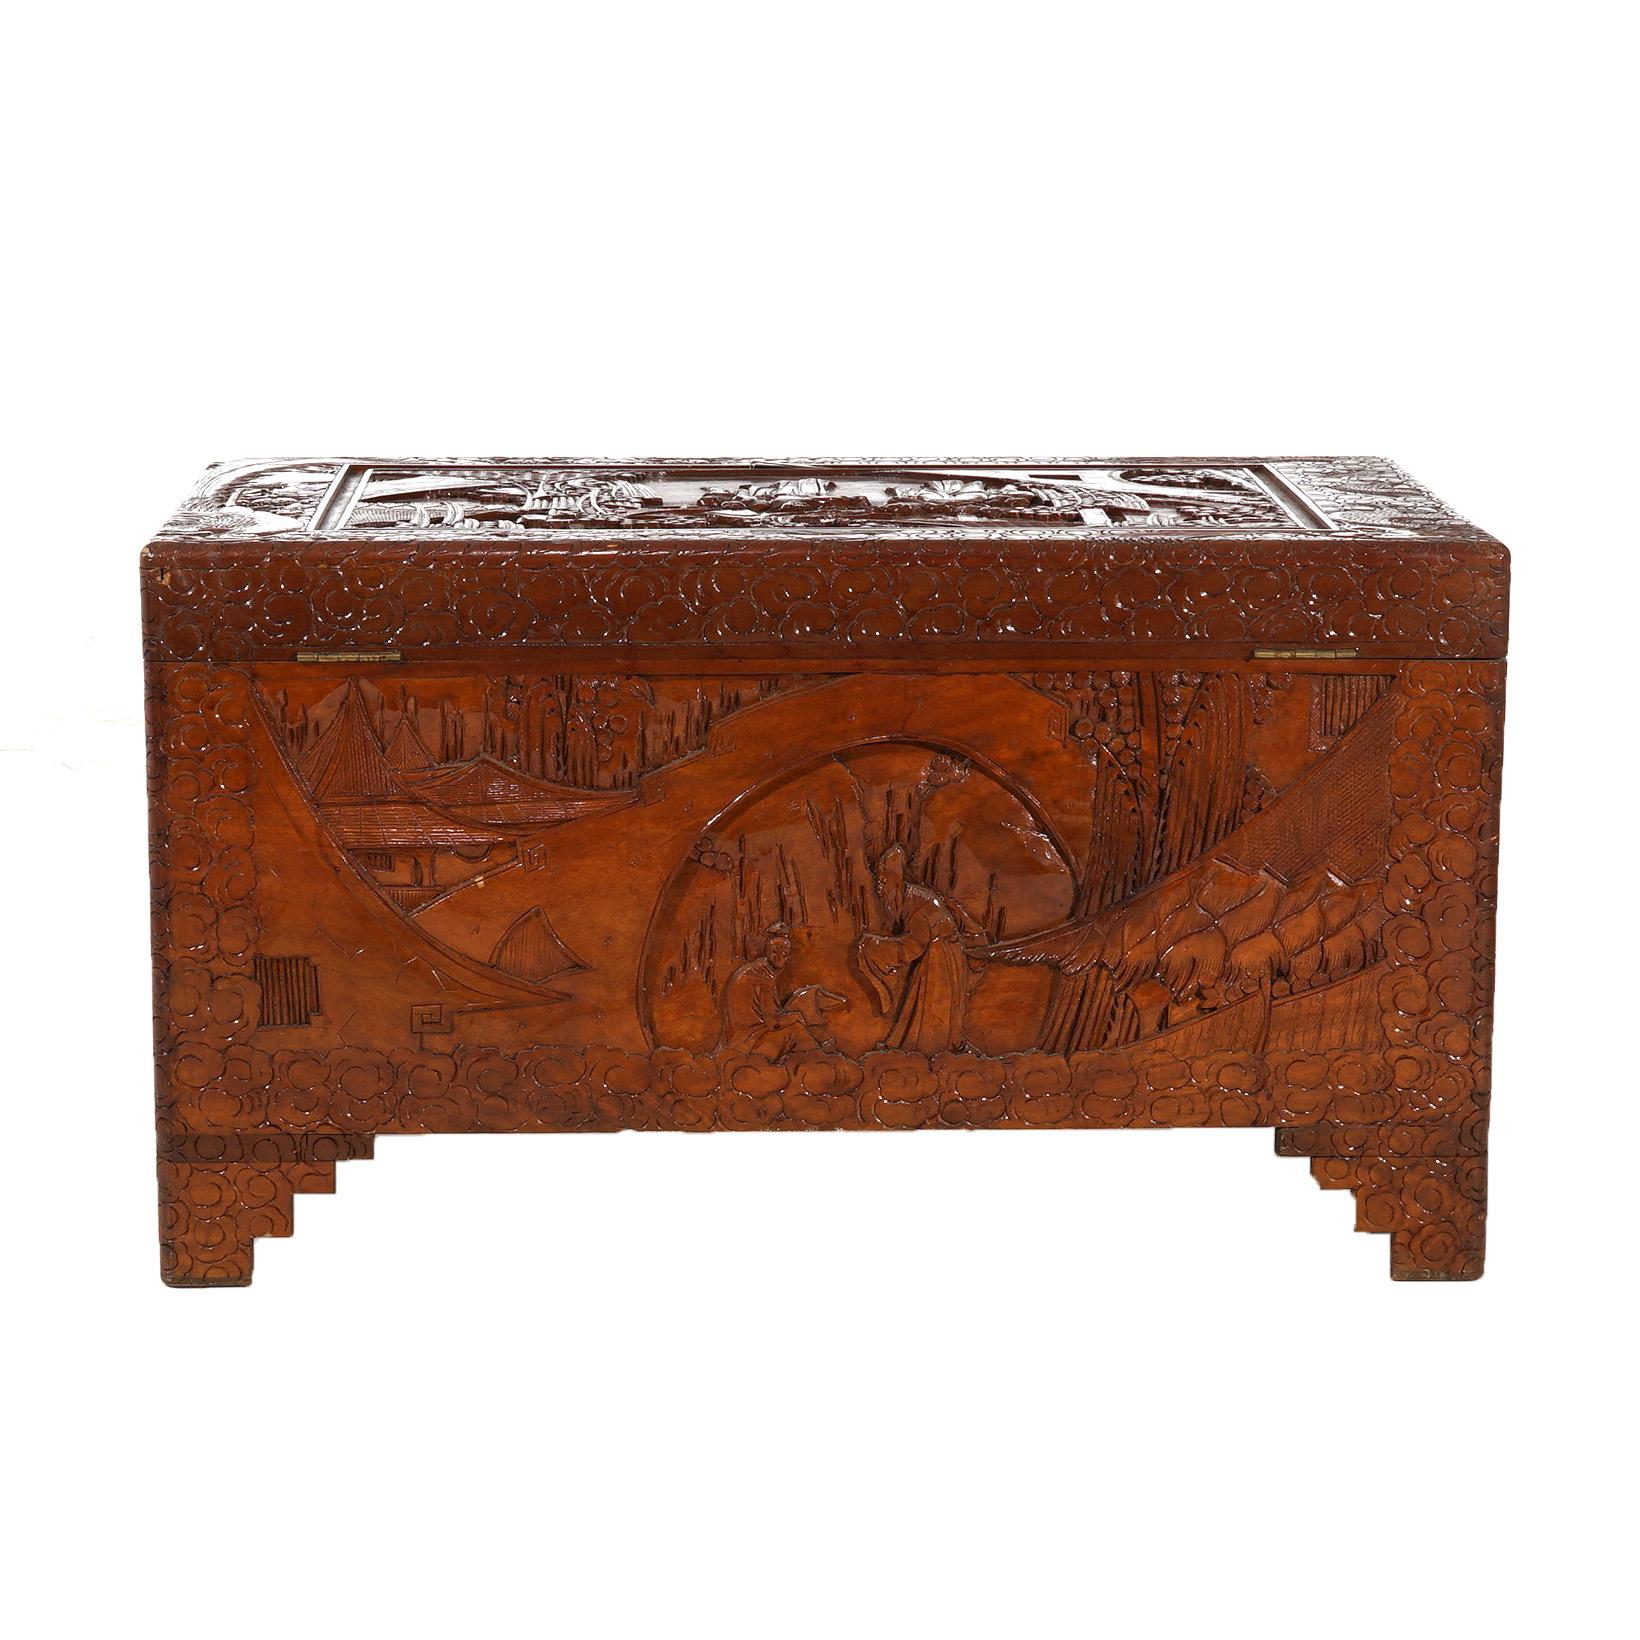 20th Century Chinese Carved Hardwood Figural Blanket Chest with Village Scene in Relief 20thC For Sale